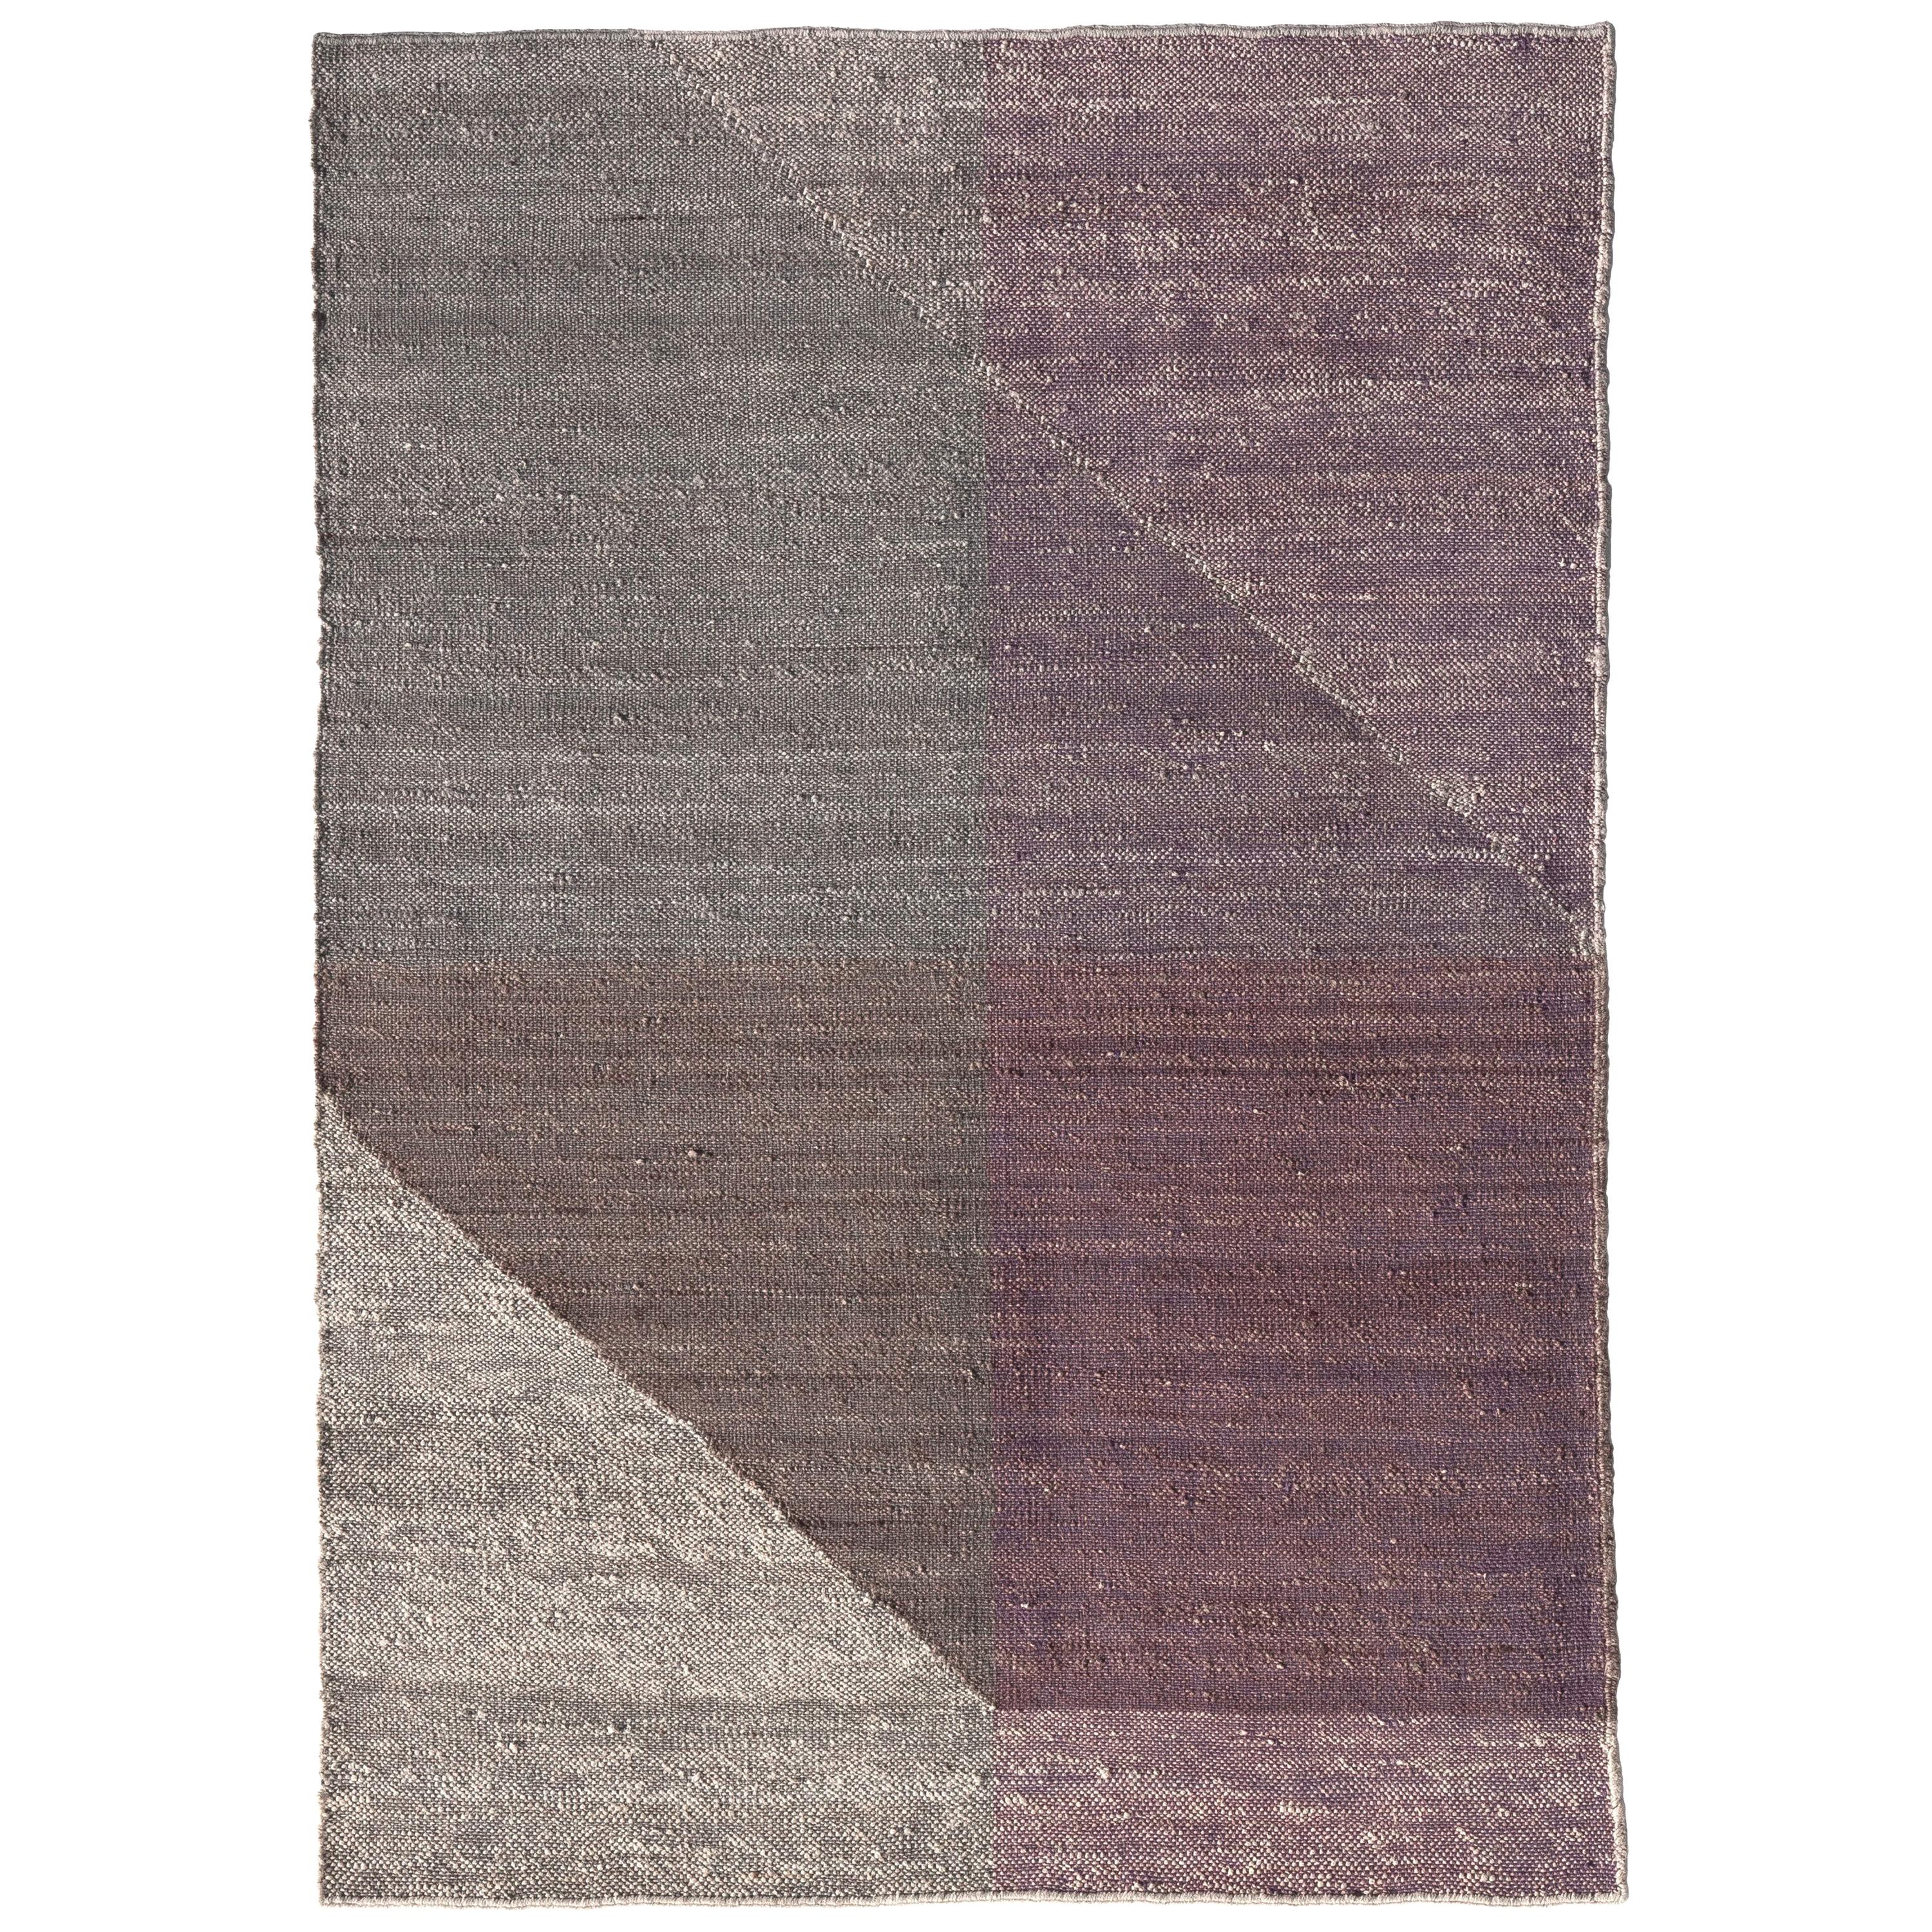 Nanimarquina Capas 4 Rug in Violet by Mathias Hahn, Small For Sale